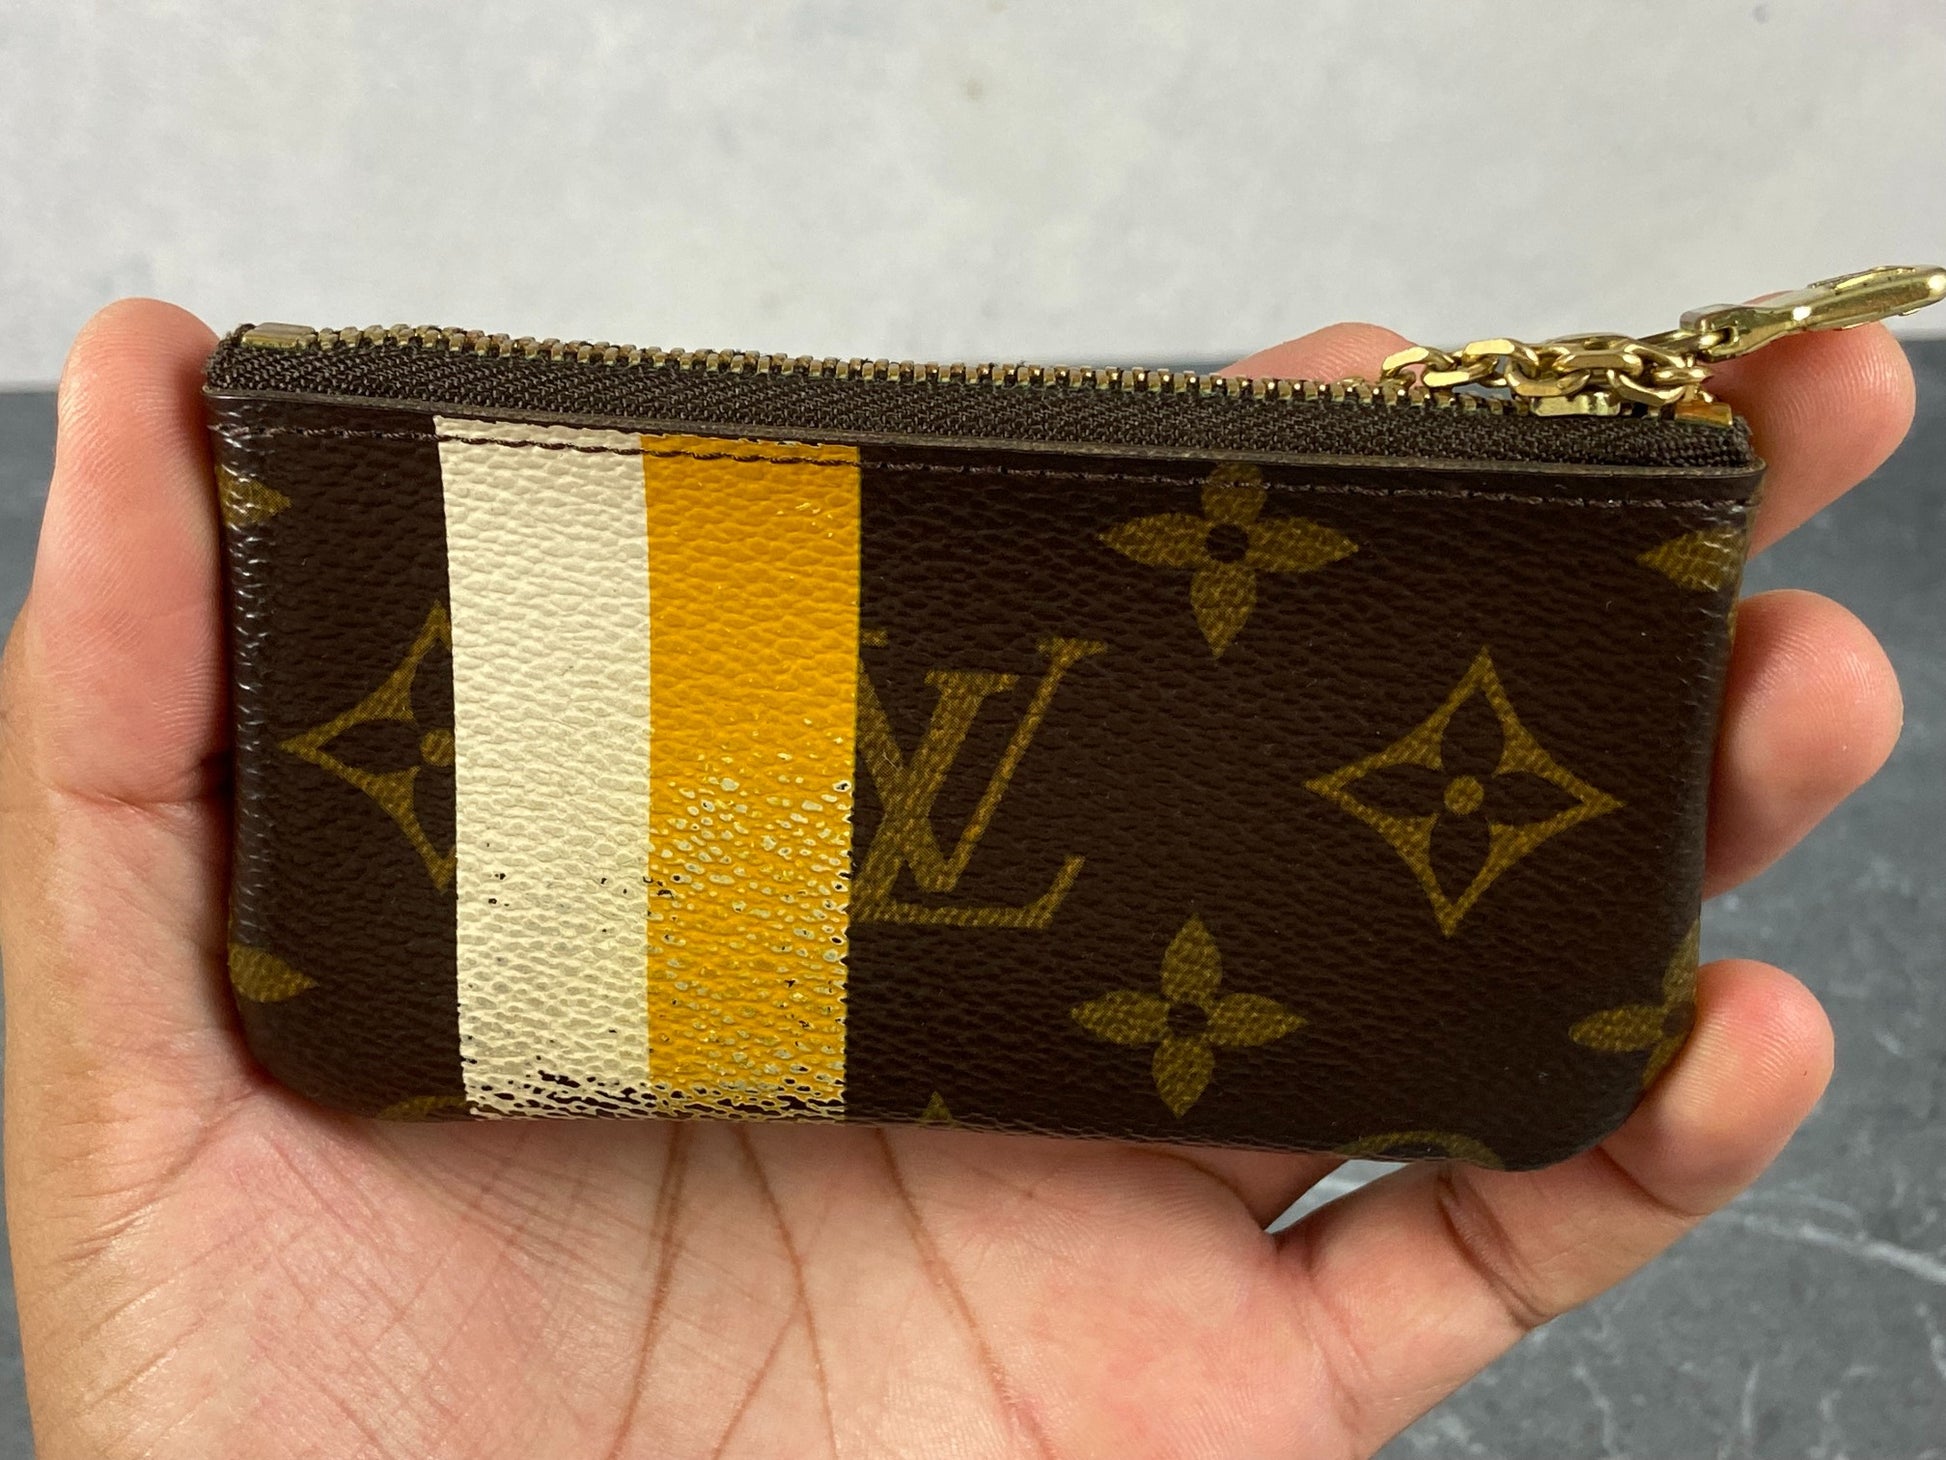 Louis Vuitton, Accessories, Limited Edition Bell Boy Key Cles